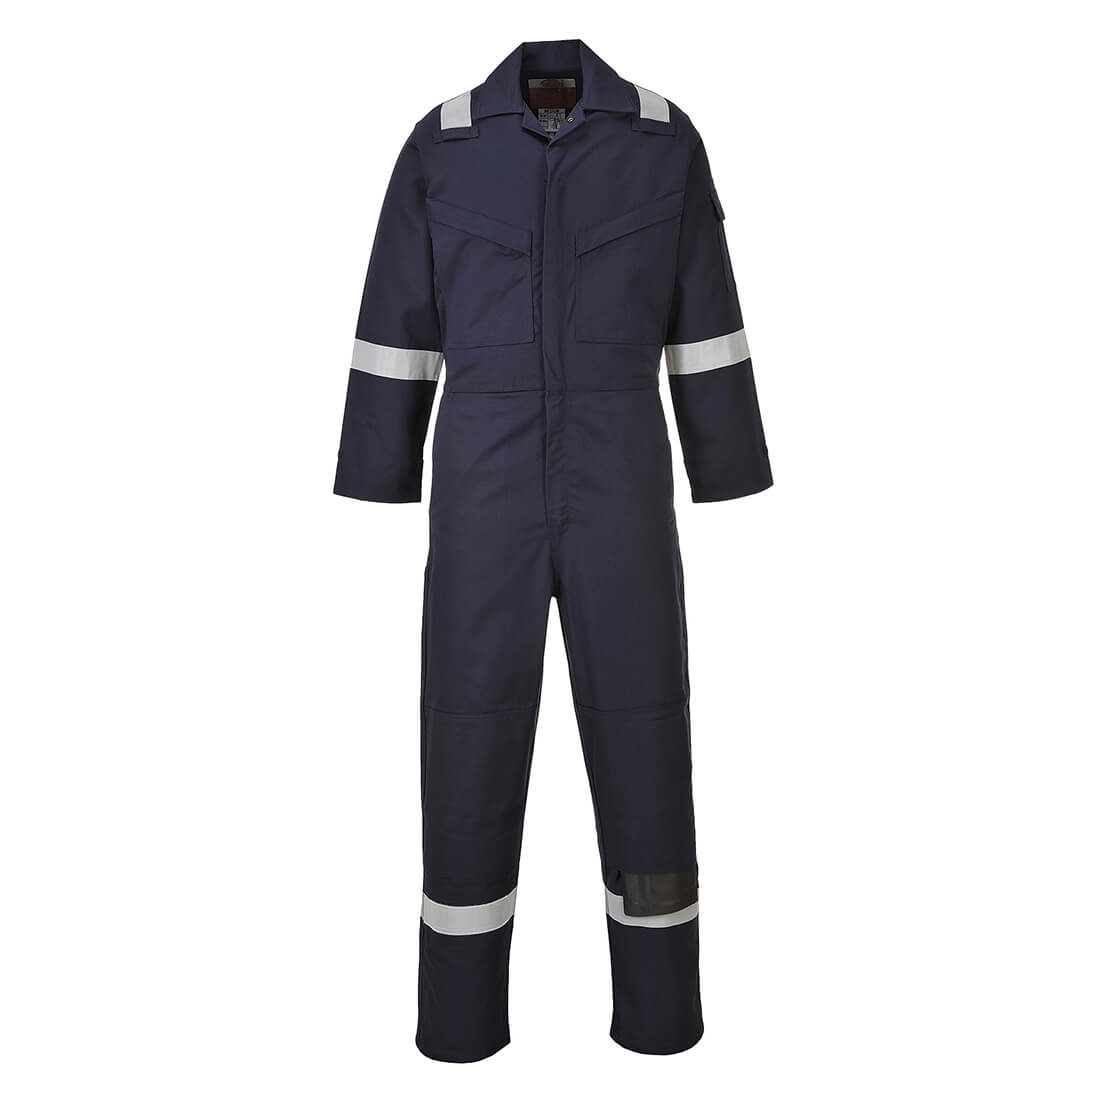 Image of Biz Flame Mens Aberdeen Flame Resistant Antistatic Coverall Navy Blue 2XL 32"